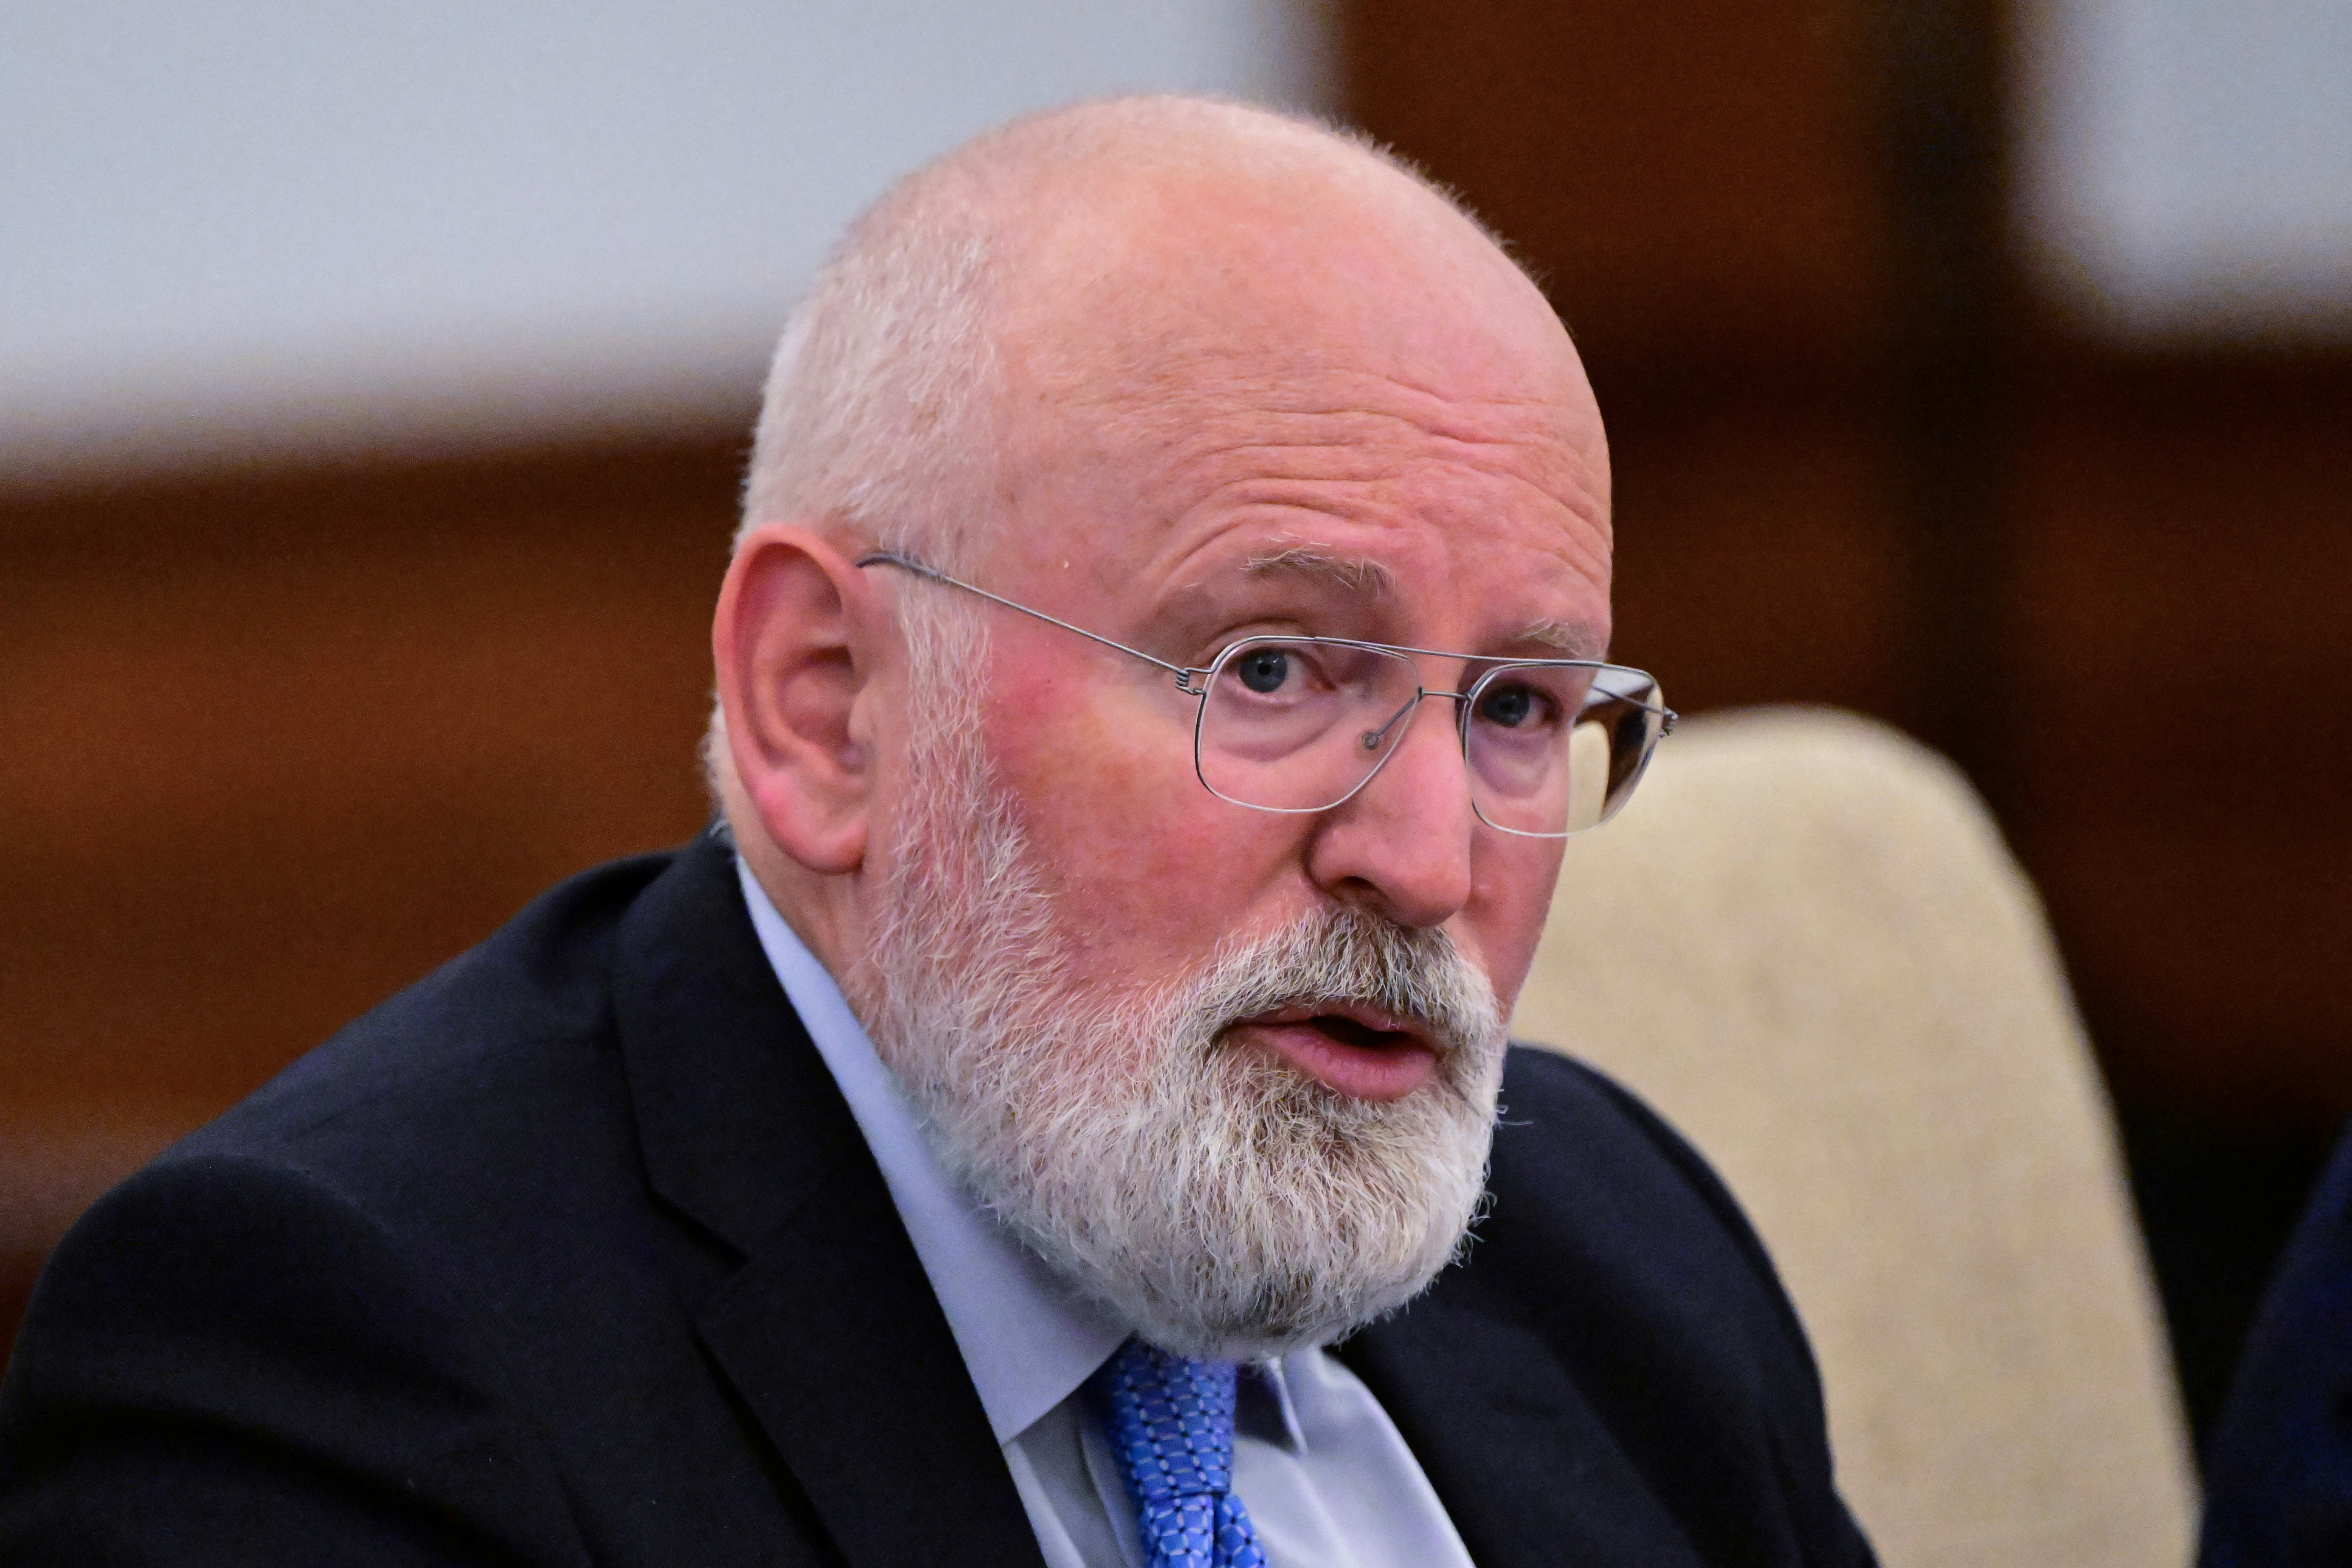 EU Commission's Frans Timmermans visits China for climate talks